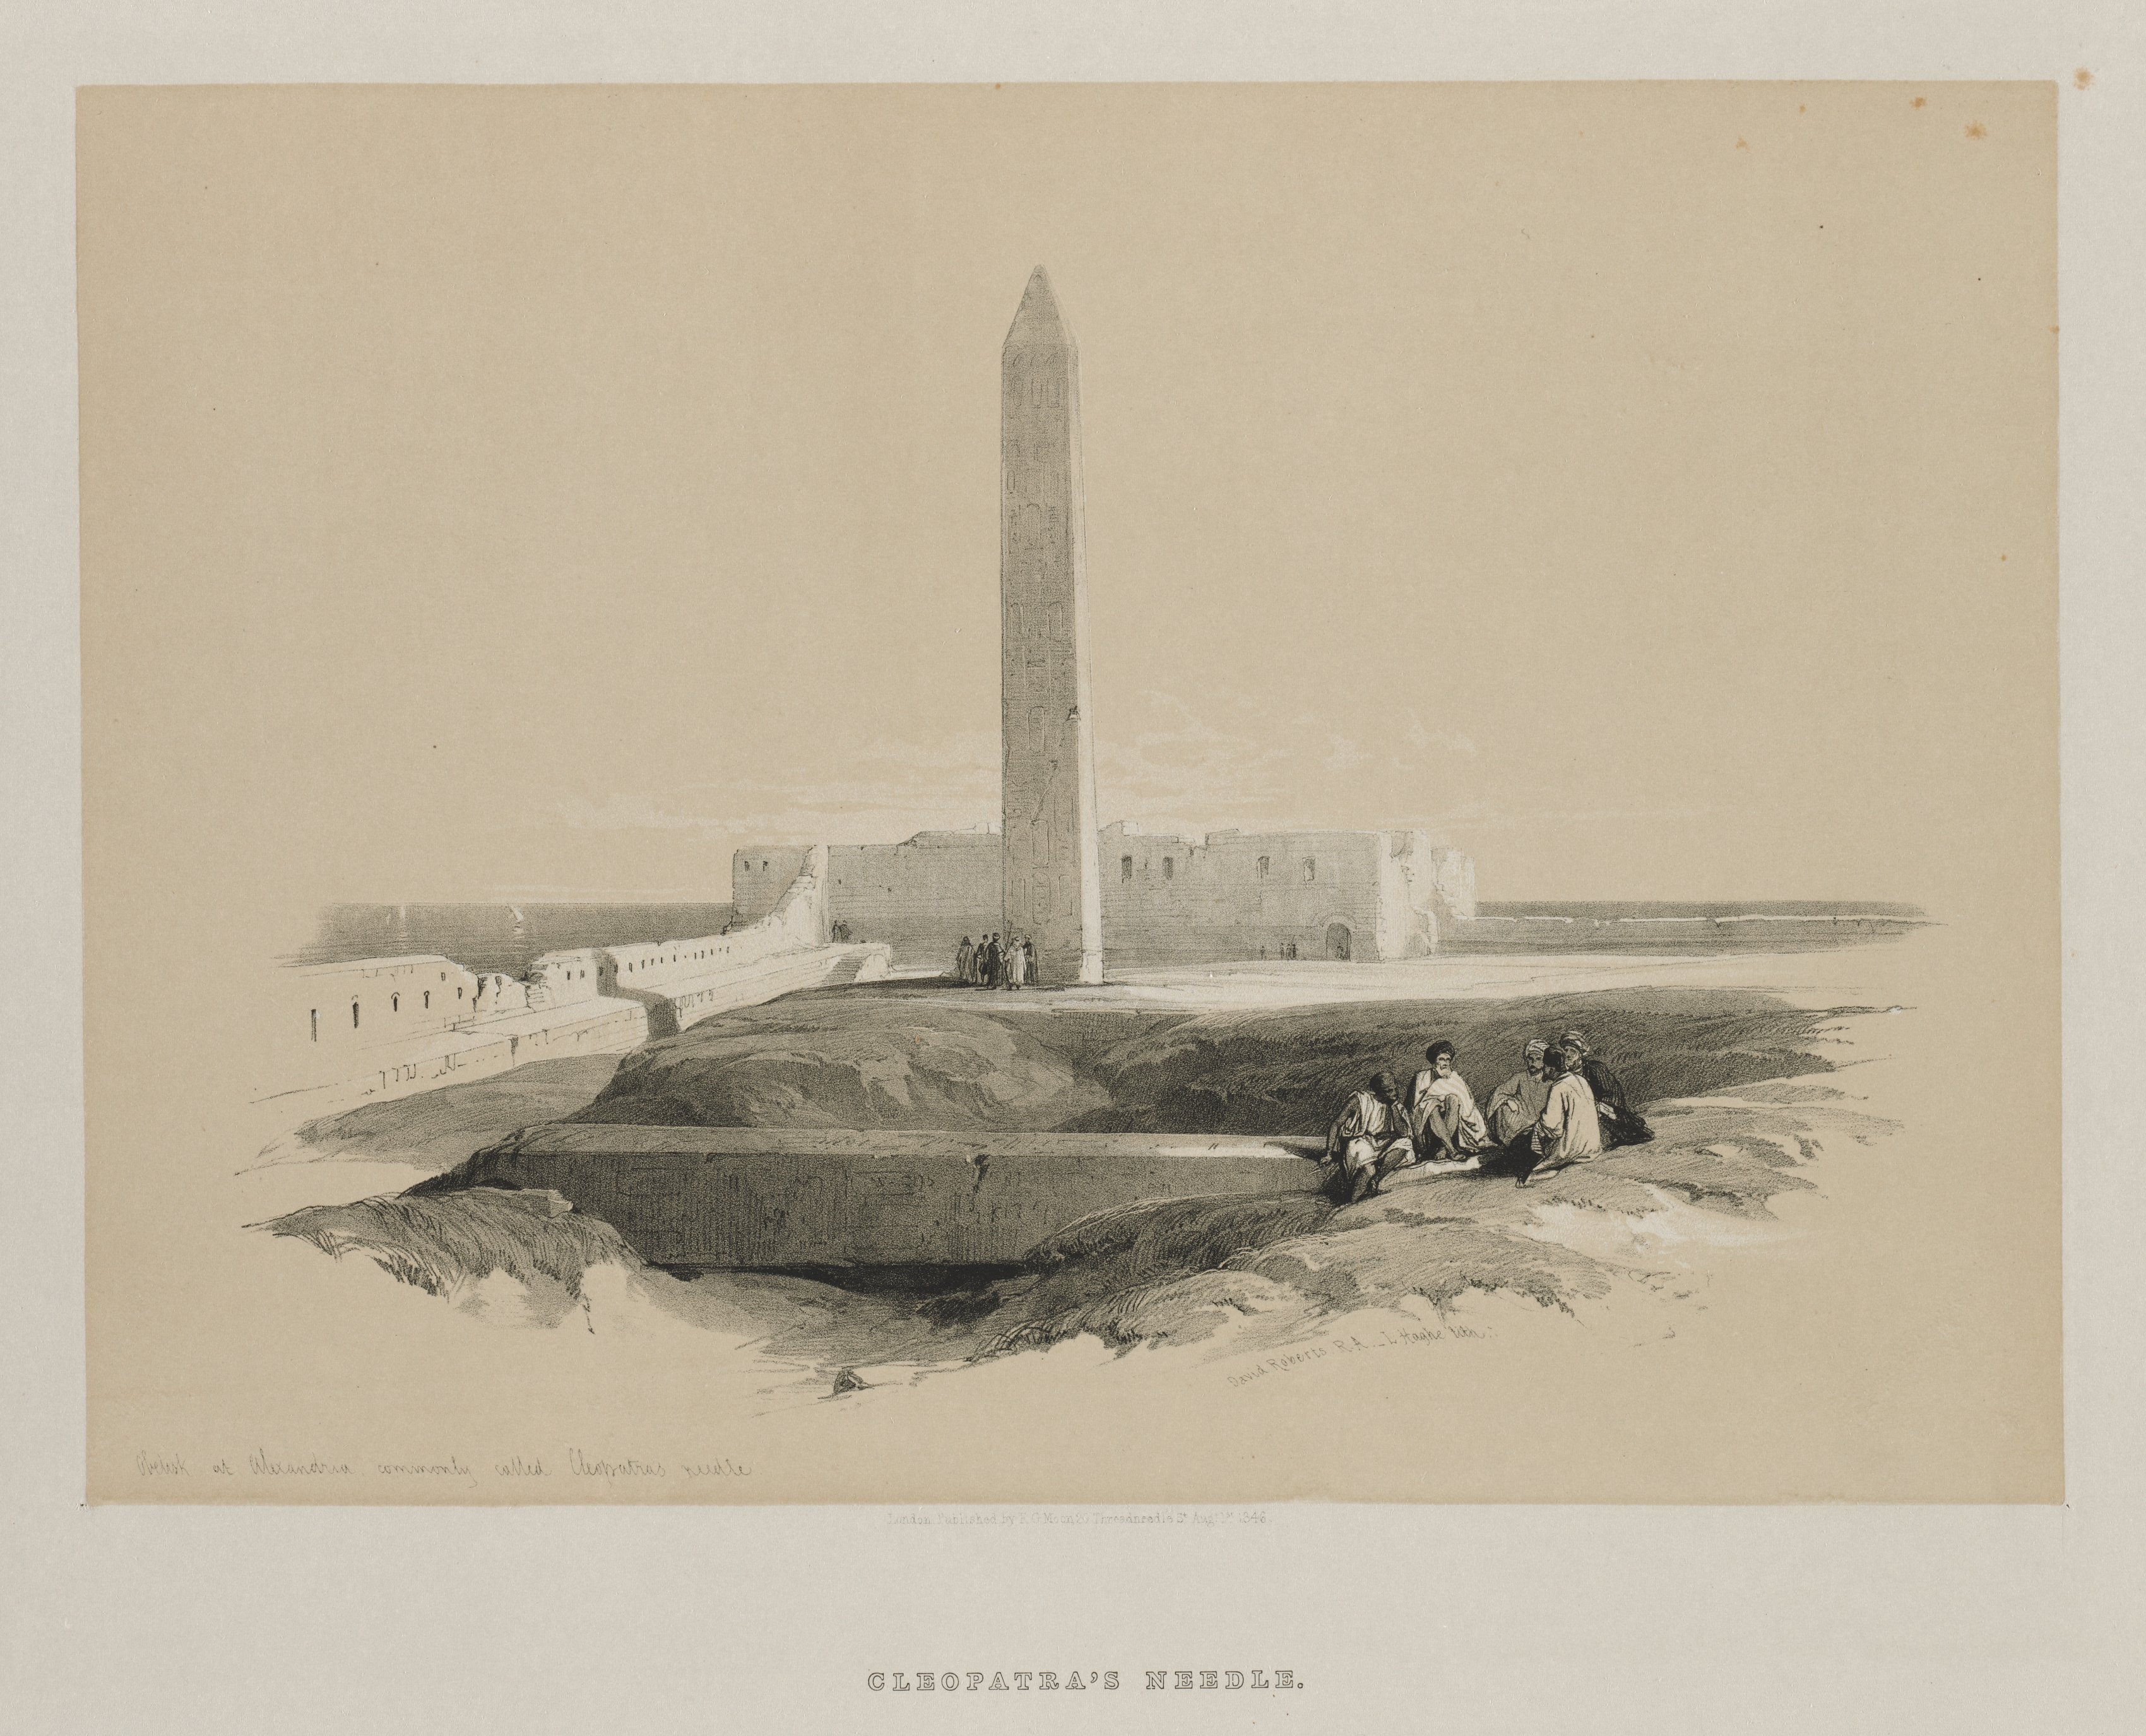 Egypt and Nubia, Volume I: Obelisk at Alexandria, Commonly called Cleopatra's Needle